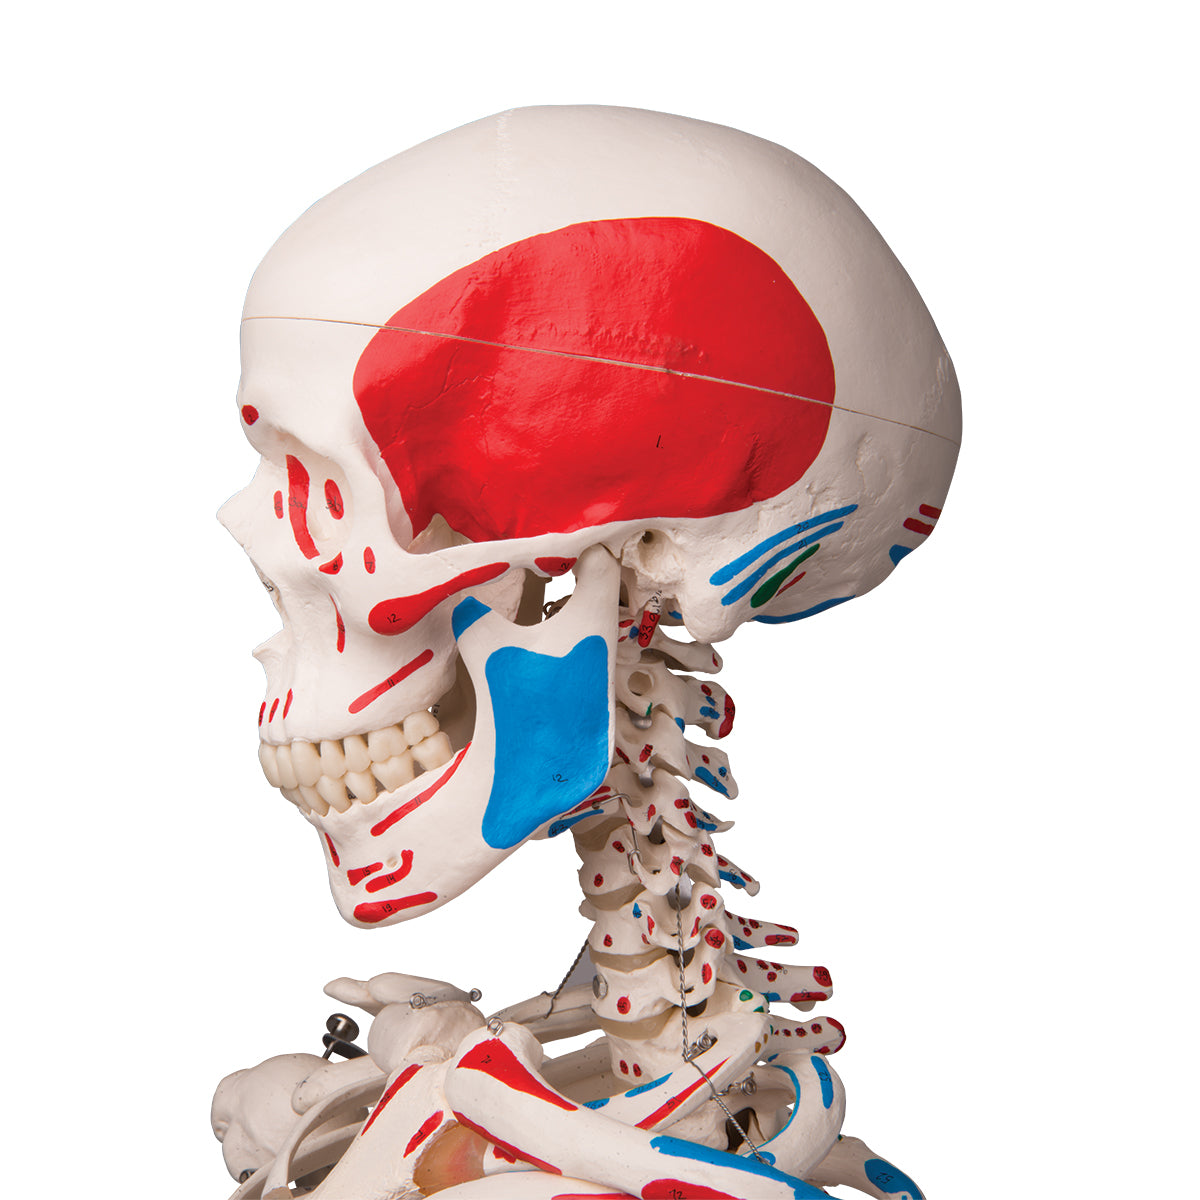 A11 Human Skeleton Model Max with Painted Muscle Origins & Inserts - 3B Smart Anatomy